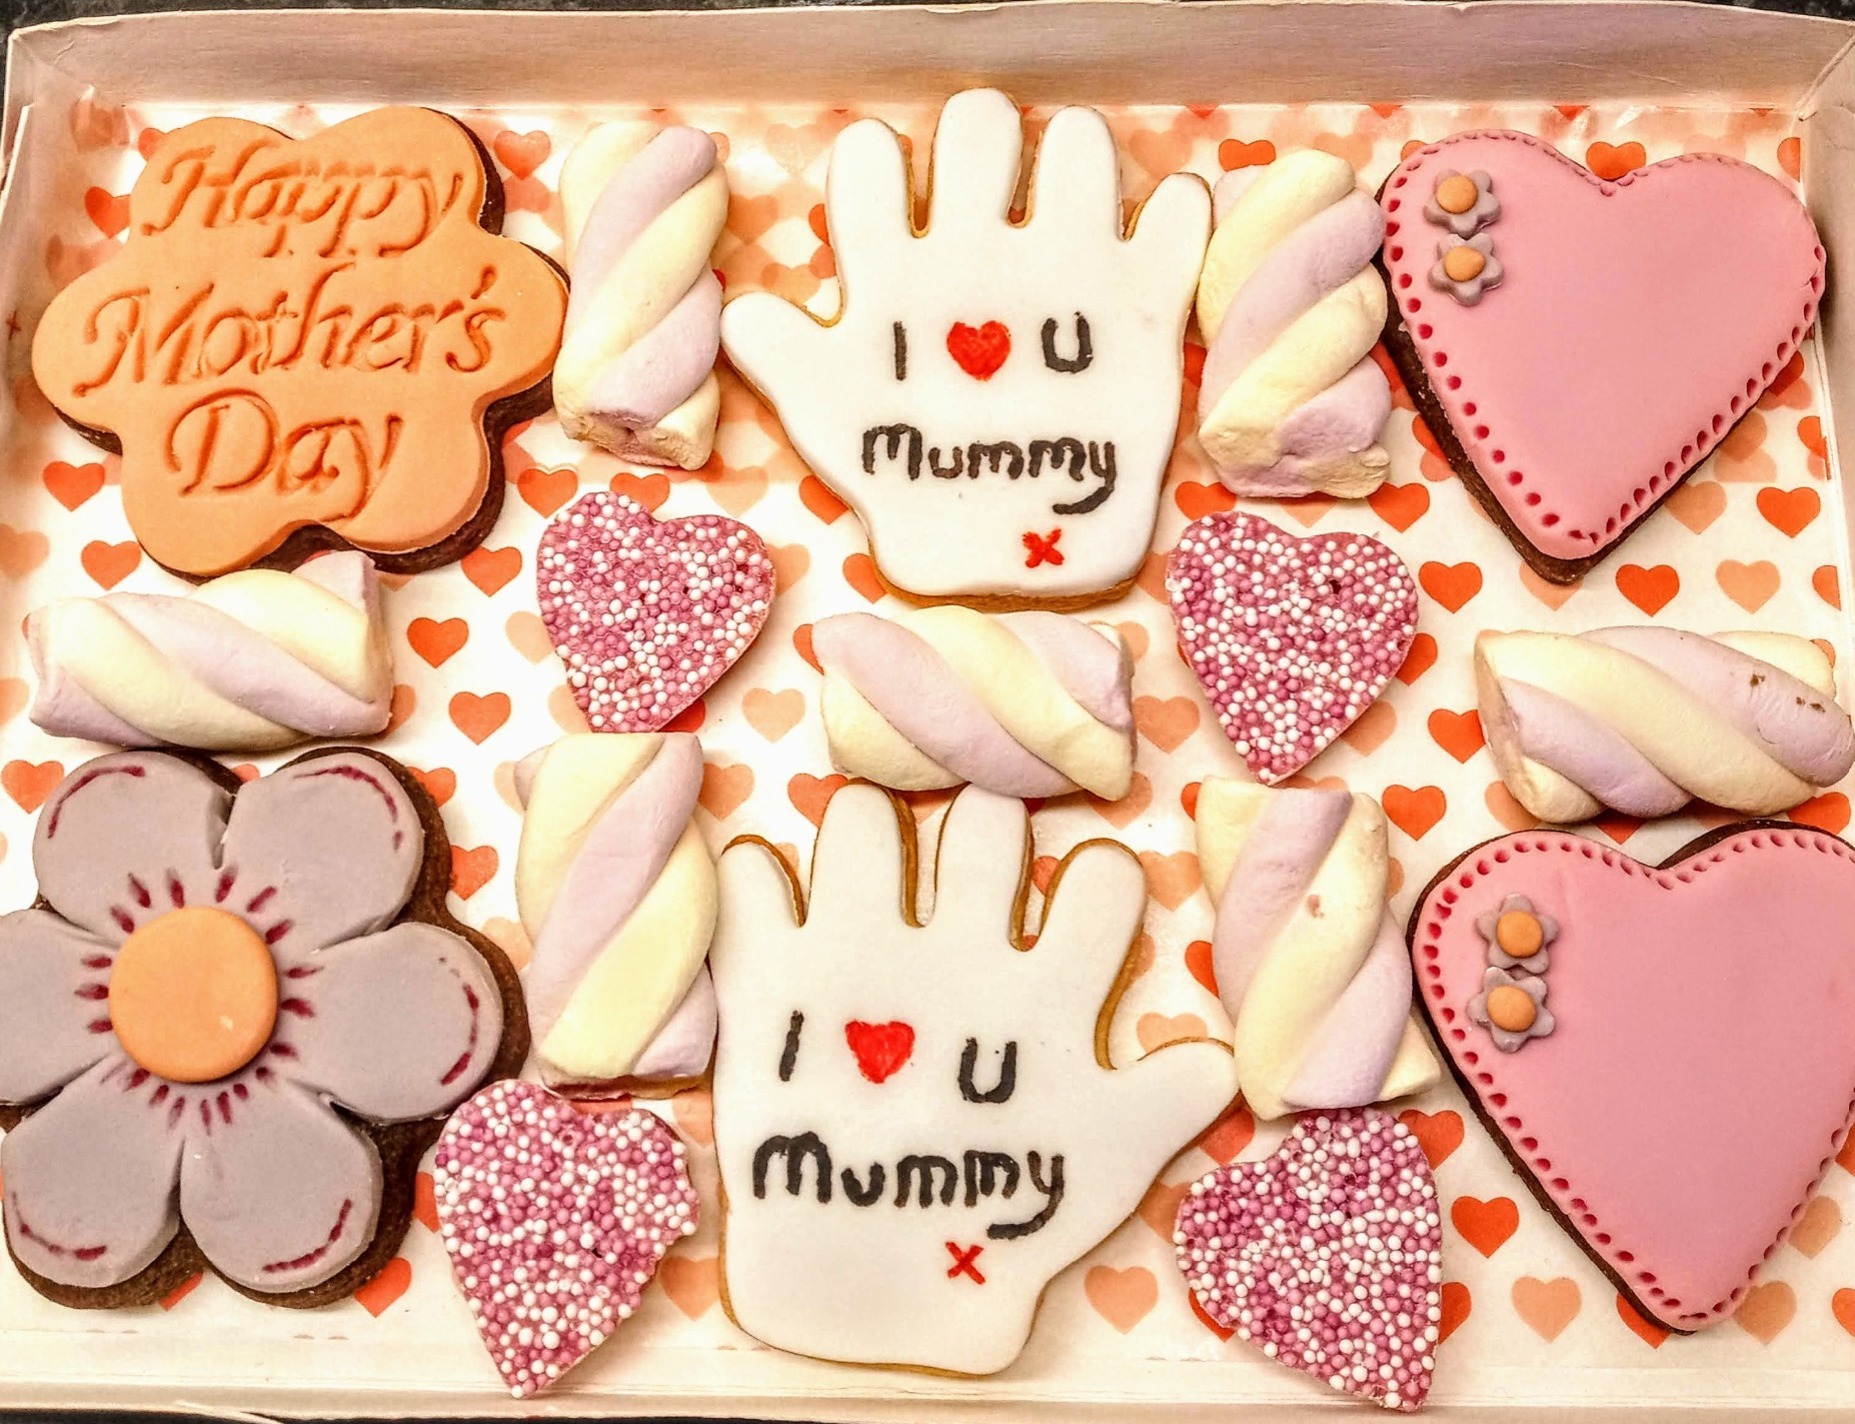 "I love you mummy" large biscuit box